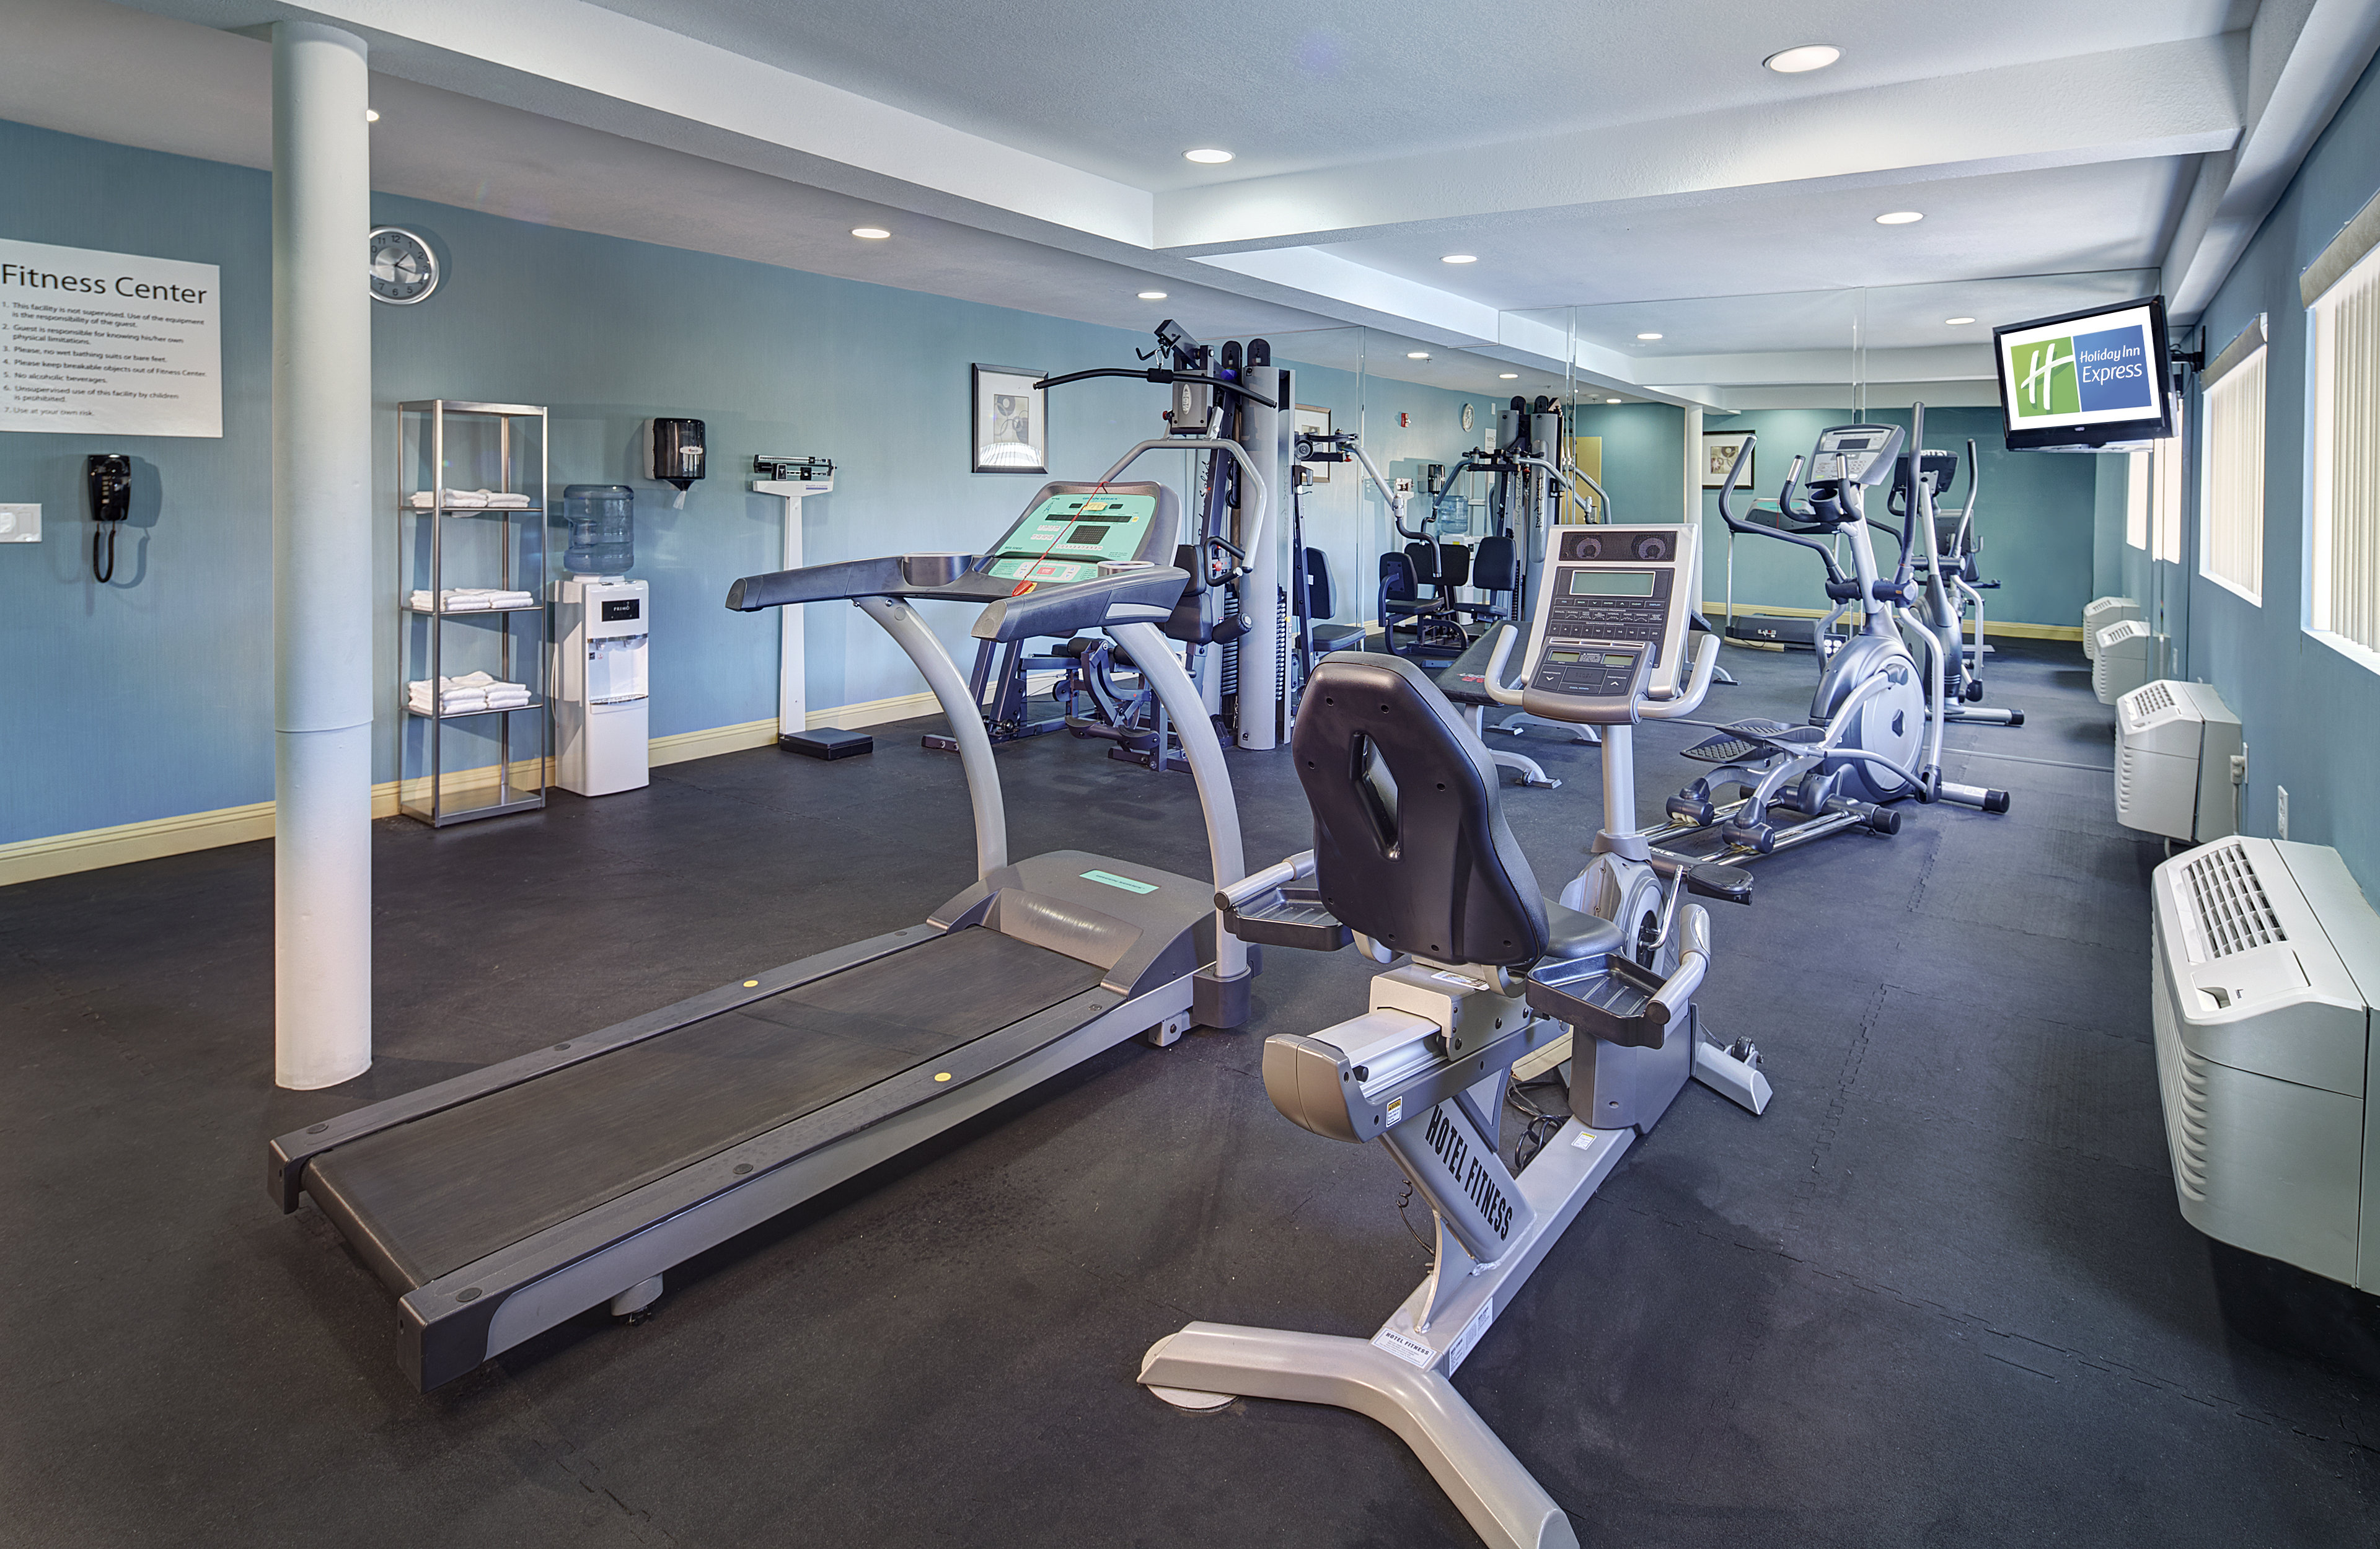 Work up a sweat at our hotel's on-site fitness center.